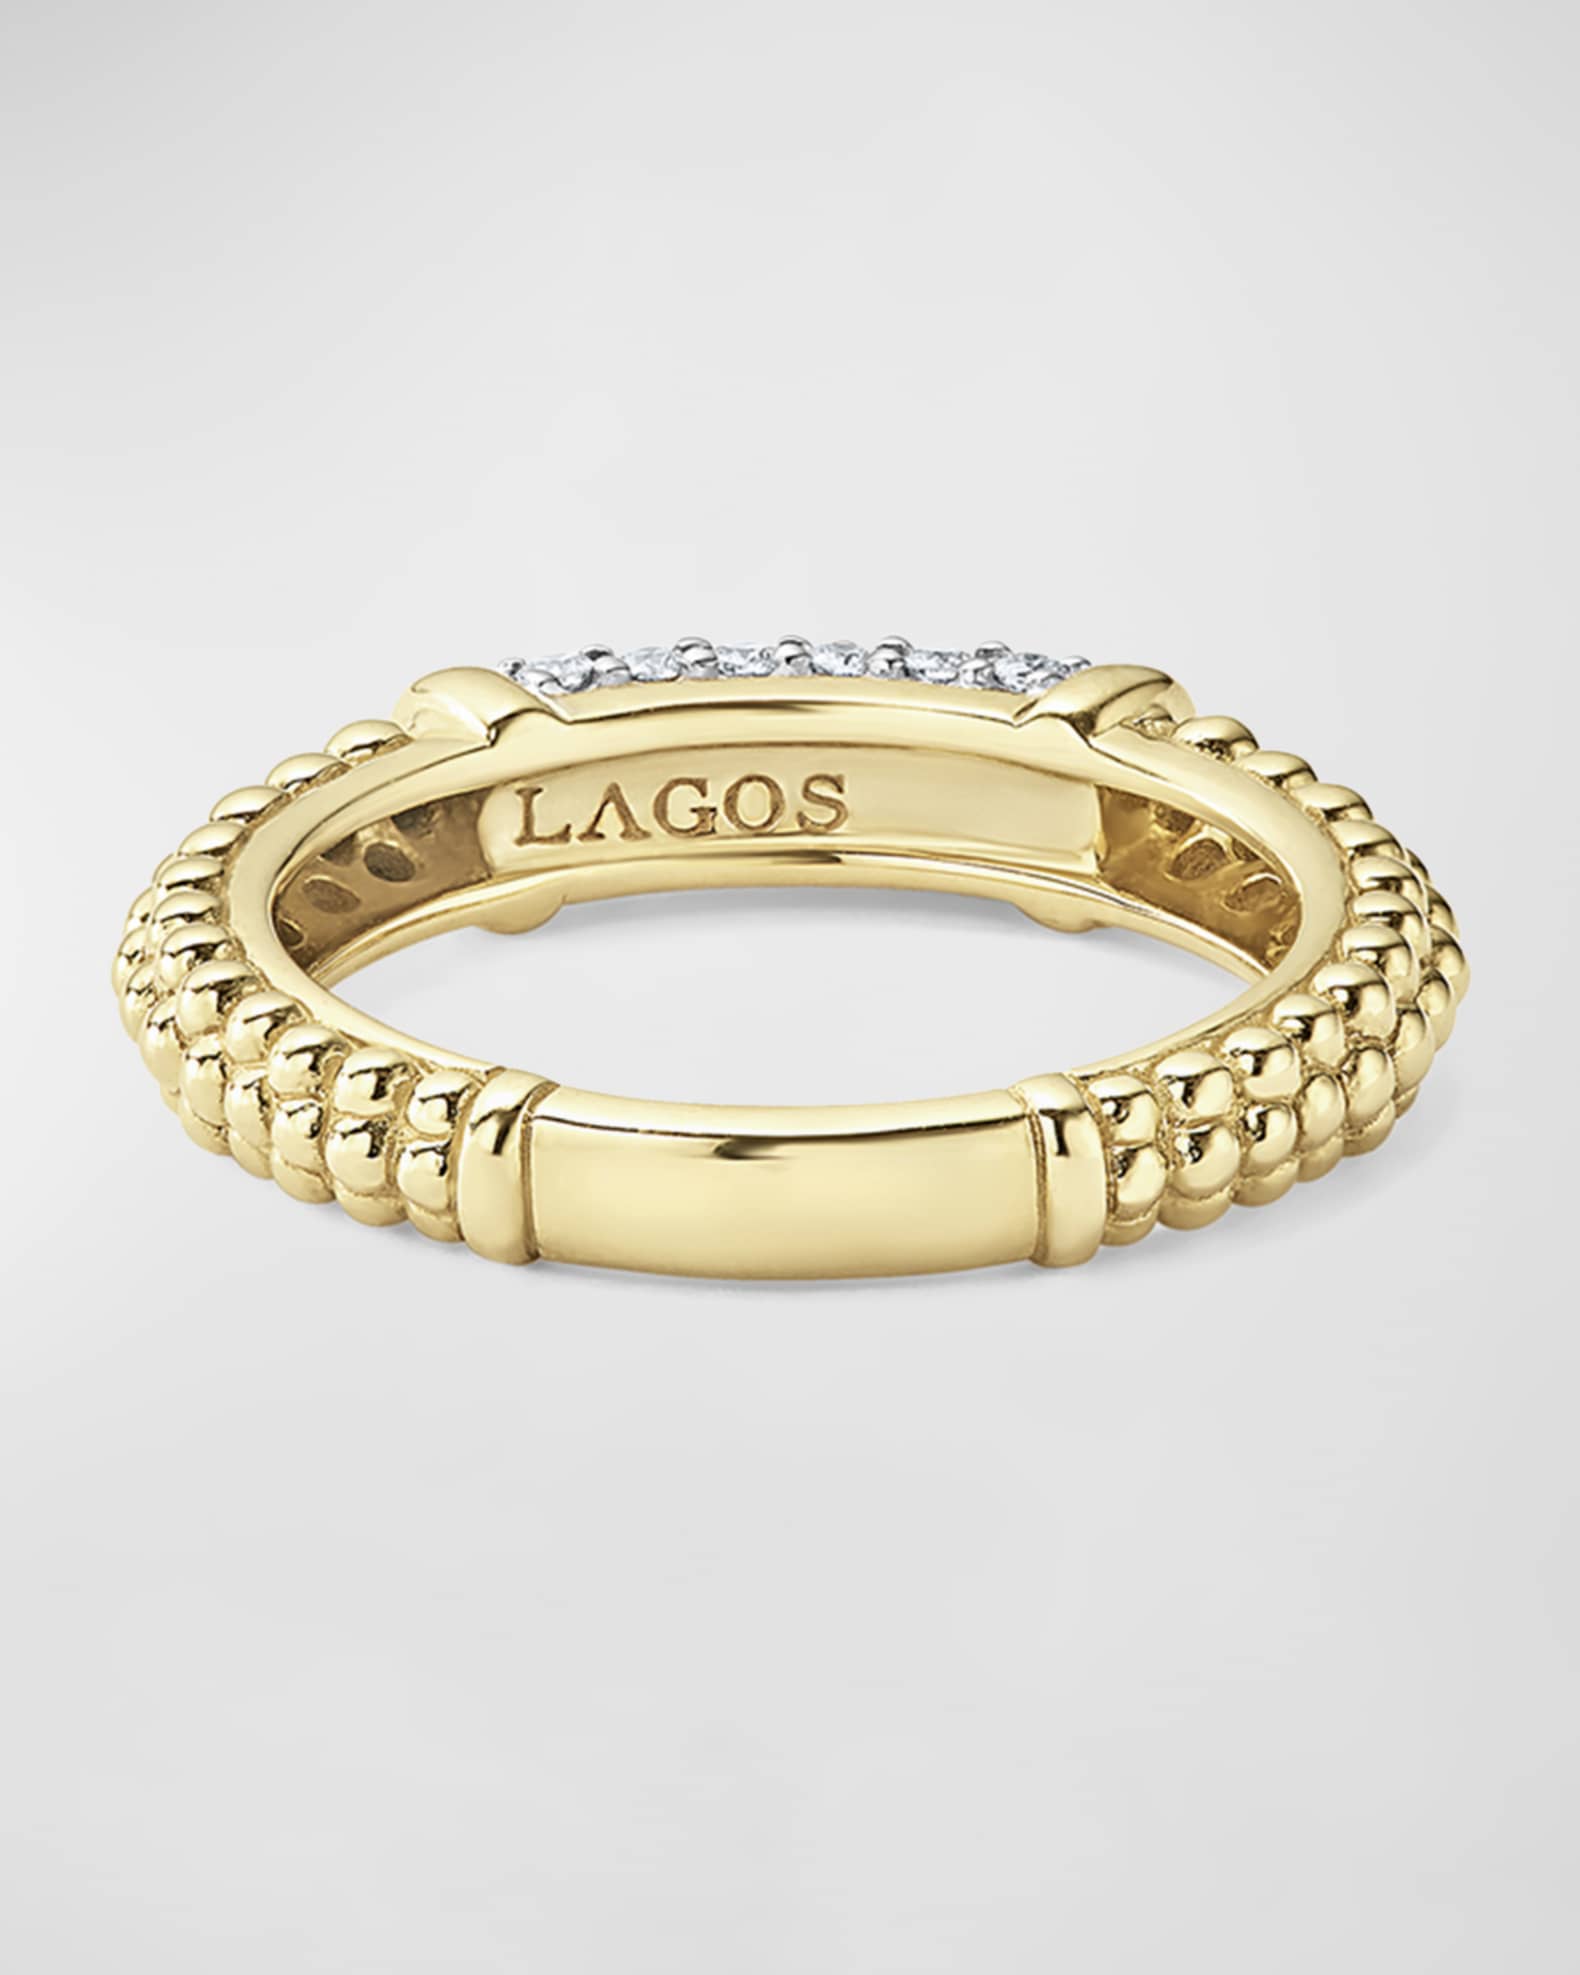 LAGOS 3mm 18k Gold Caviar Stack Ring with White Diamonds, Size 7 ...